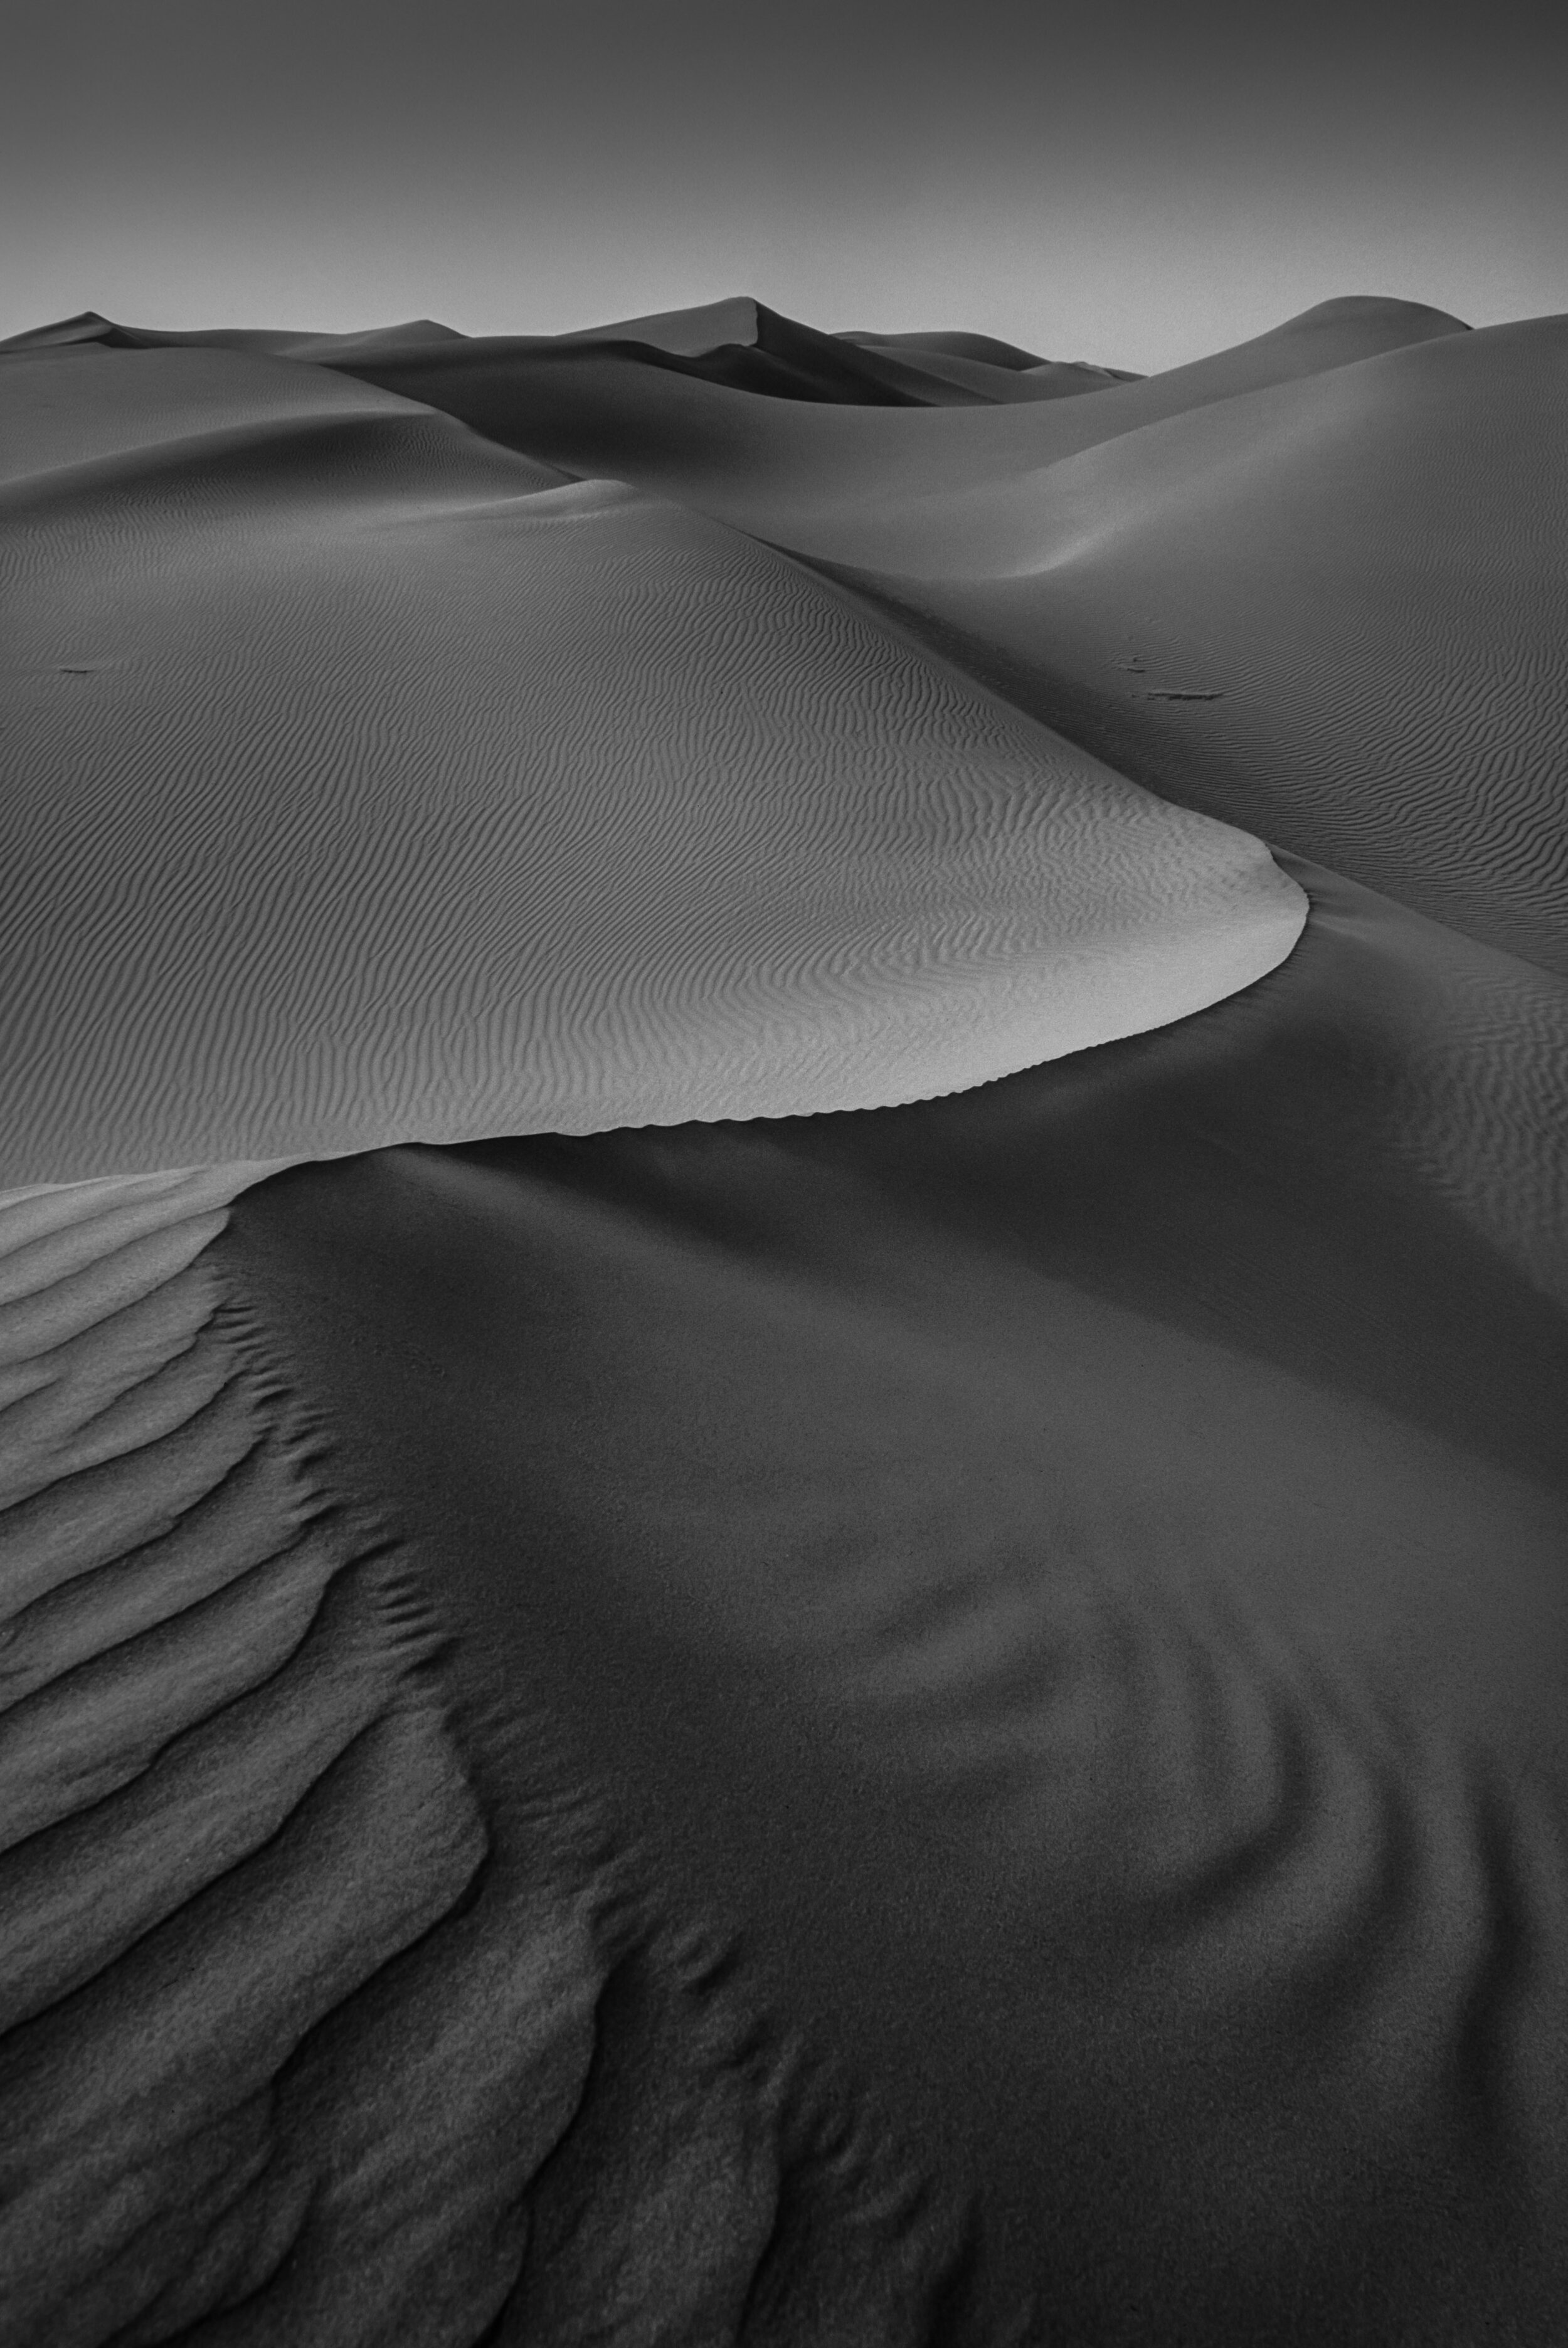  As a photographer there was a never ending supply of artistic and untouched sand dunes to photograph.  